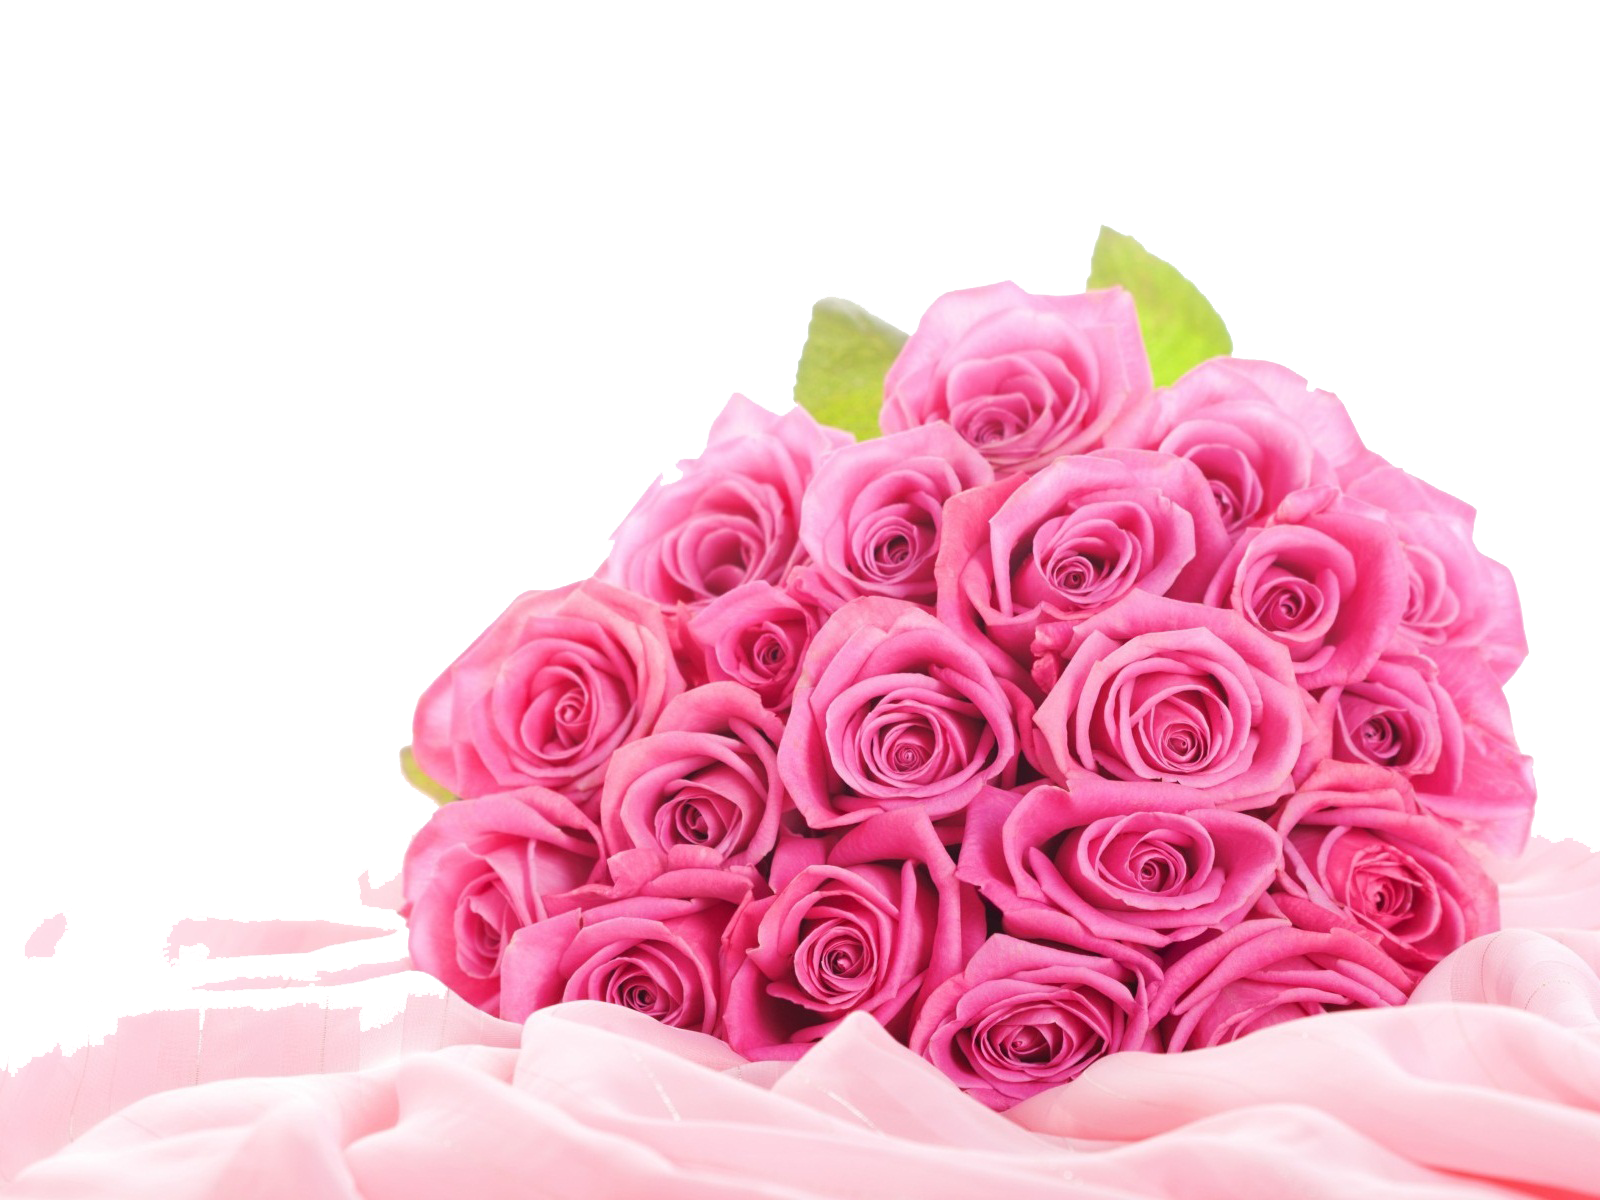 Bouquet Rose Photos Valentine PNG Image High Quality PNG Image